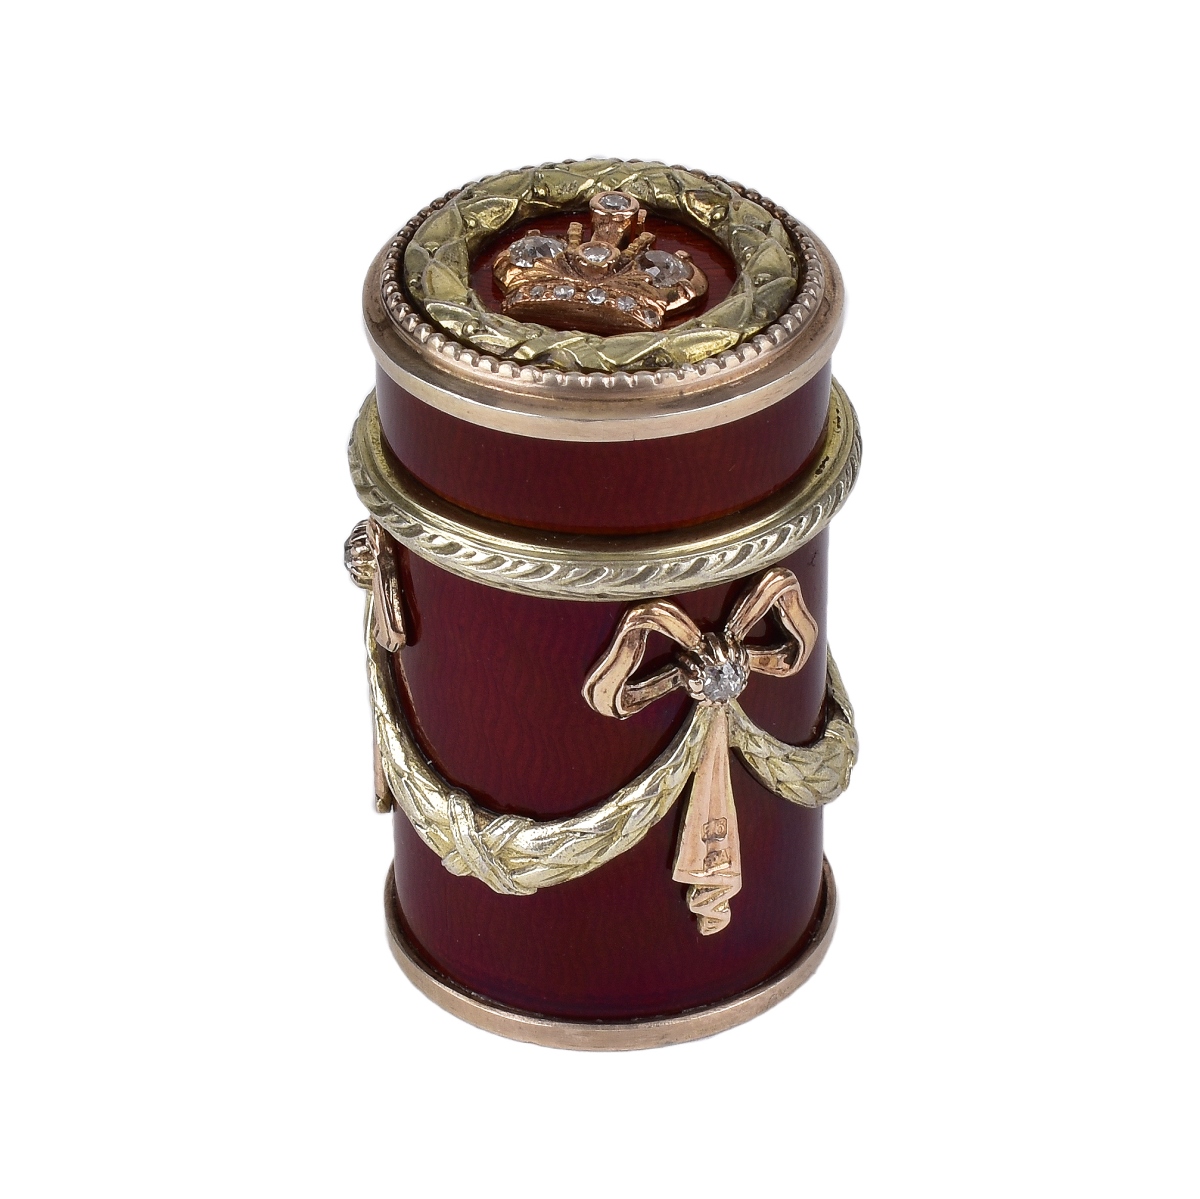 Faberge Style Guilloche Enamel and Silver Box